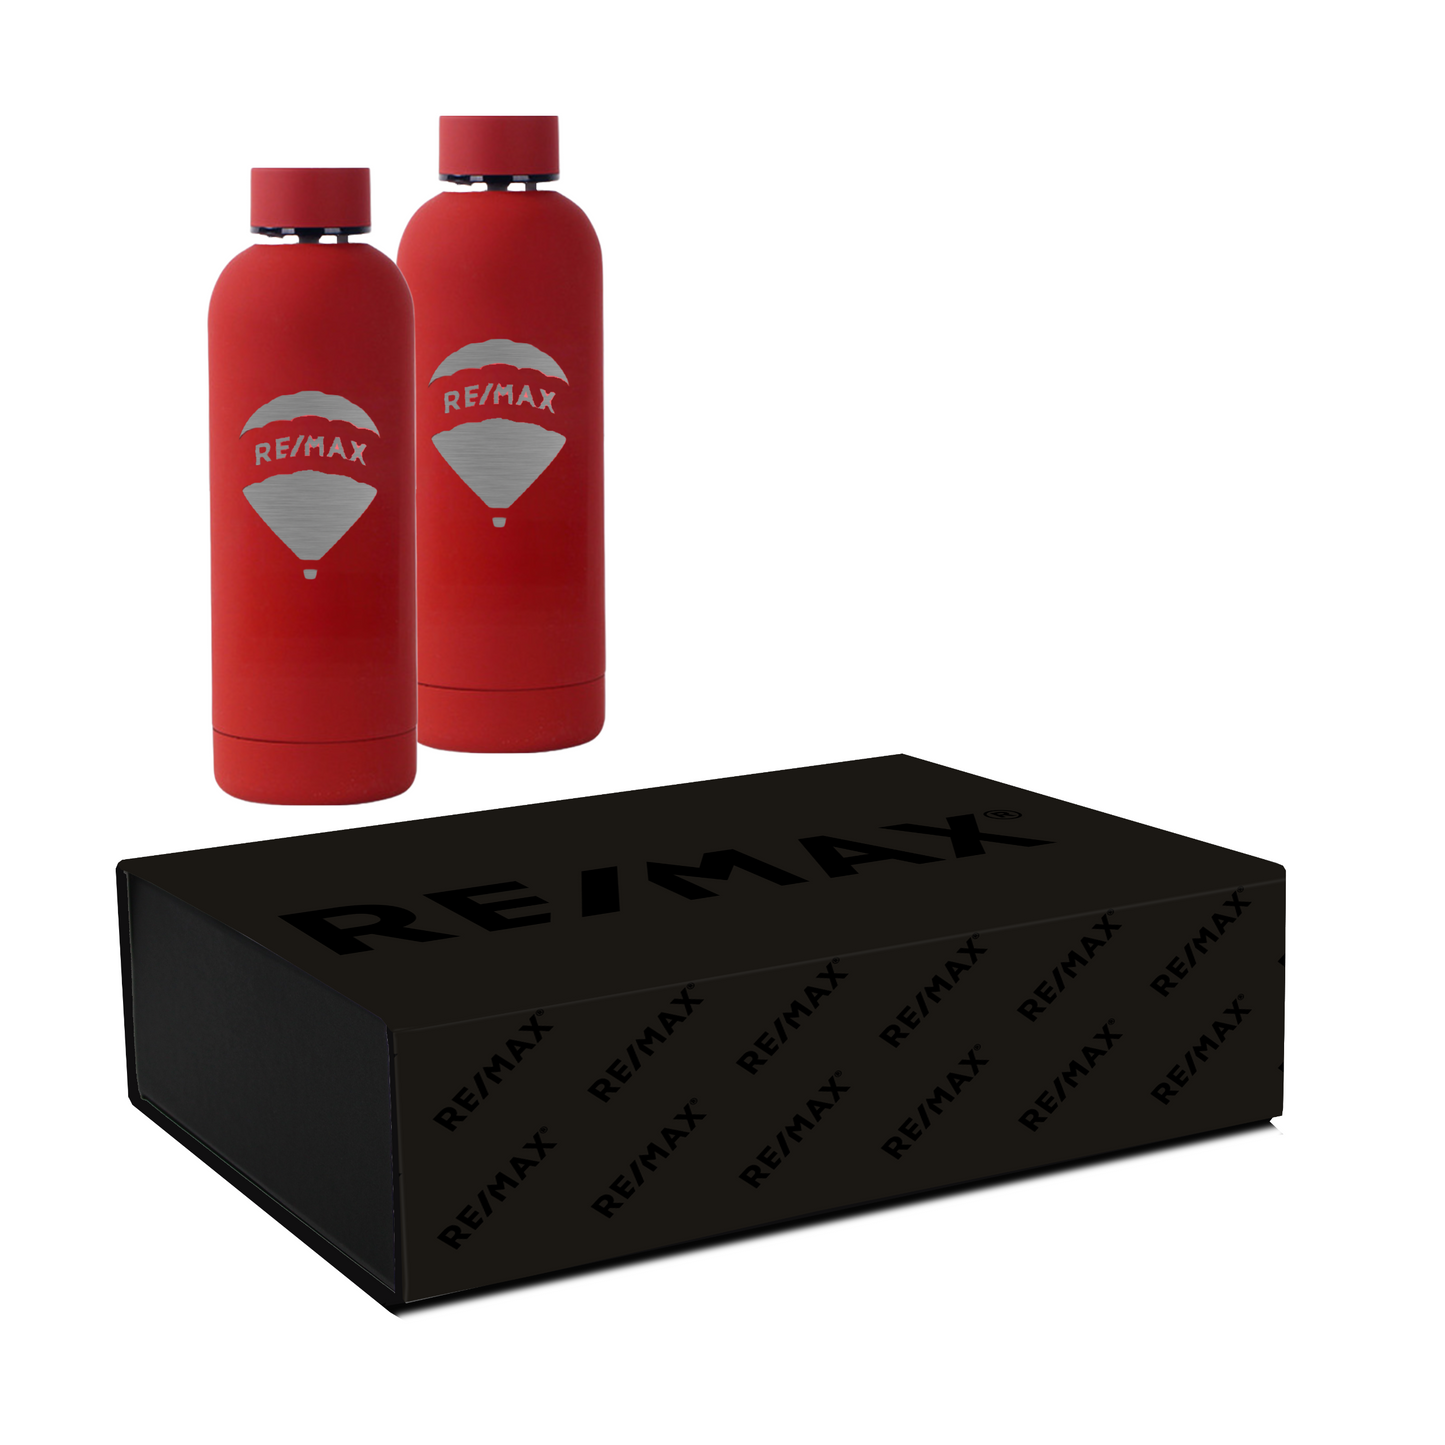 RE/MAX Water Bottles in RE/MAX Closing Gift Box (from $58 per complete box)